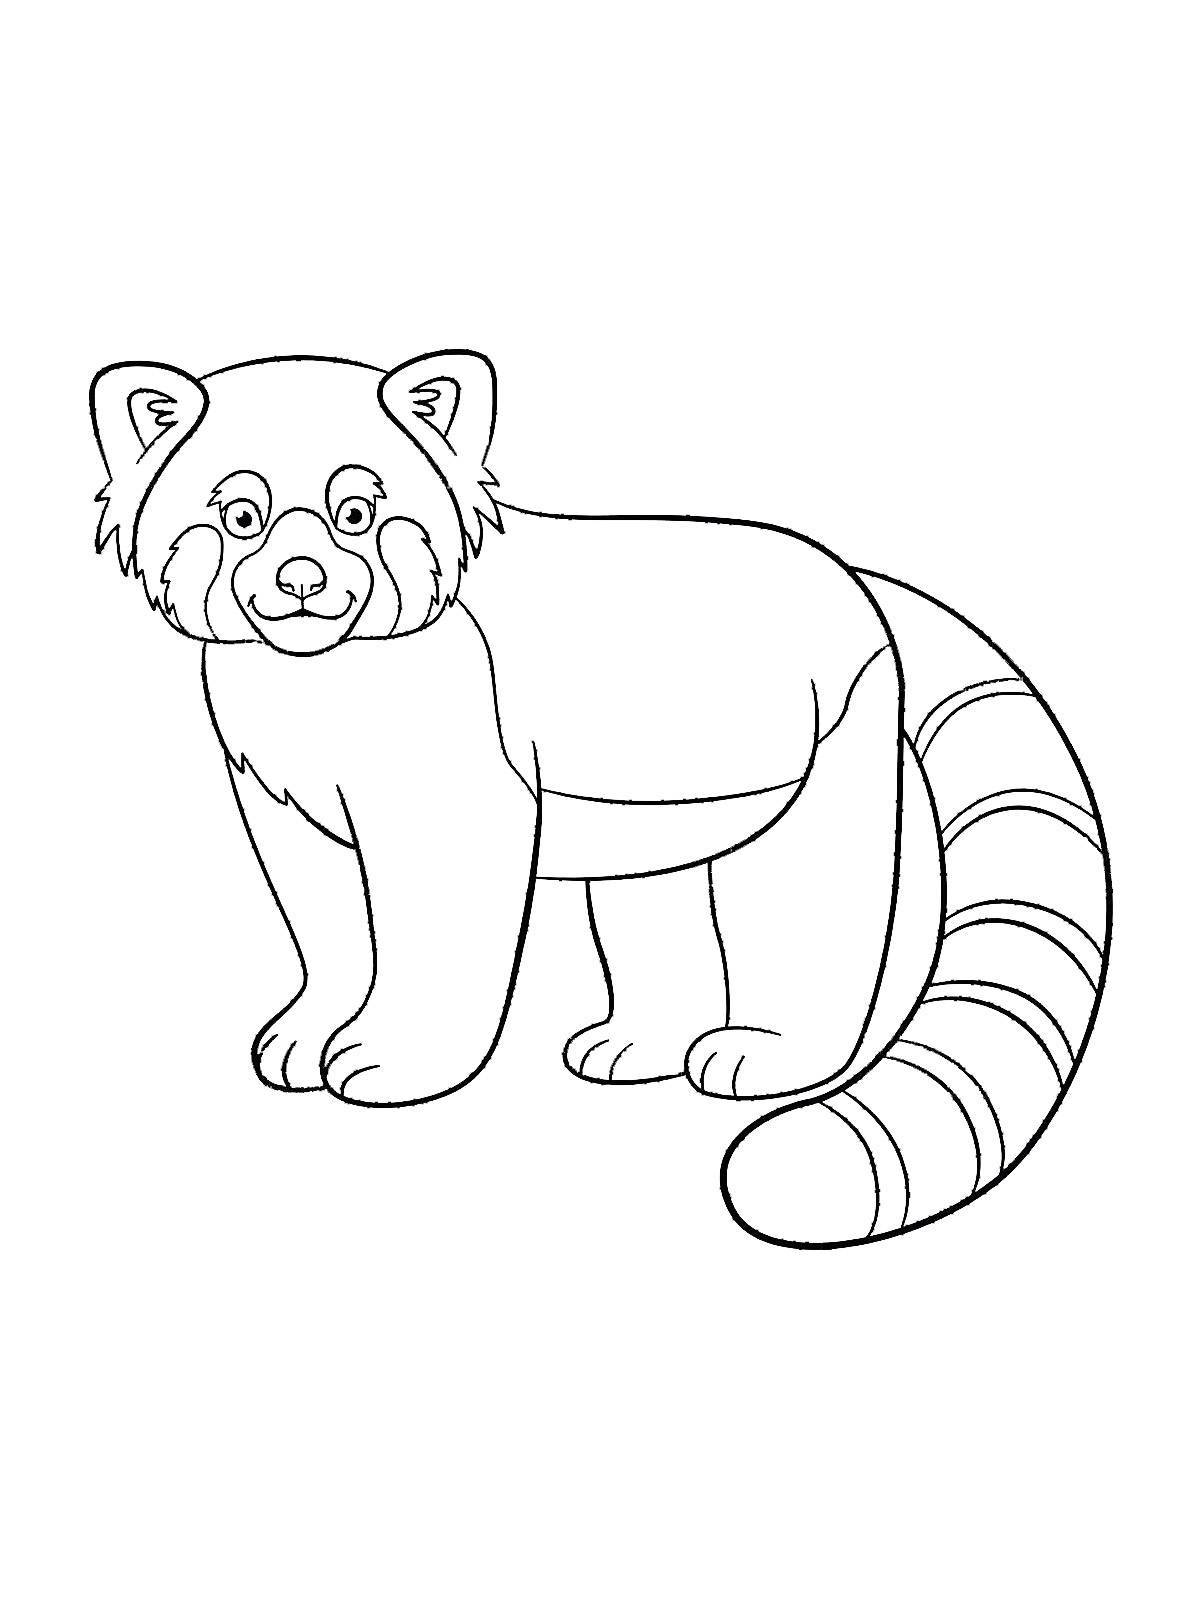 Coloring page magical red panda